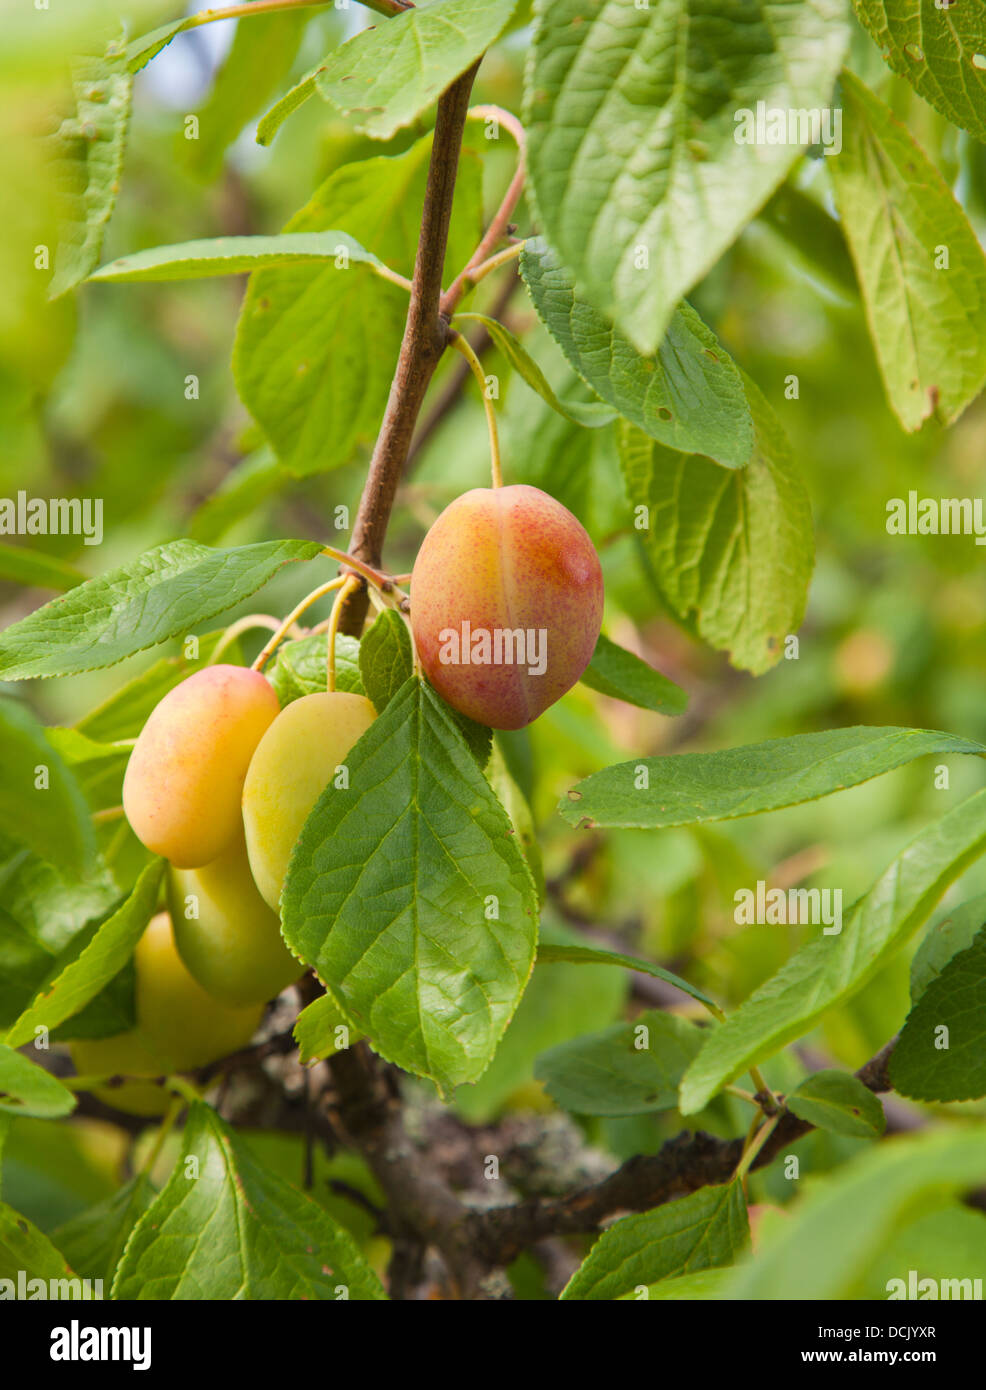 ripening victoria plums on branches Stock Photo